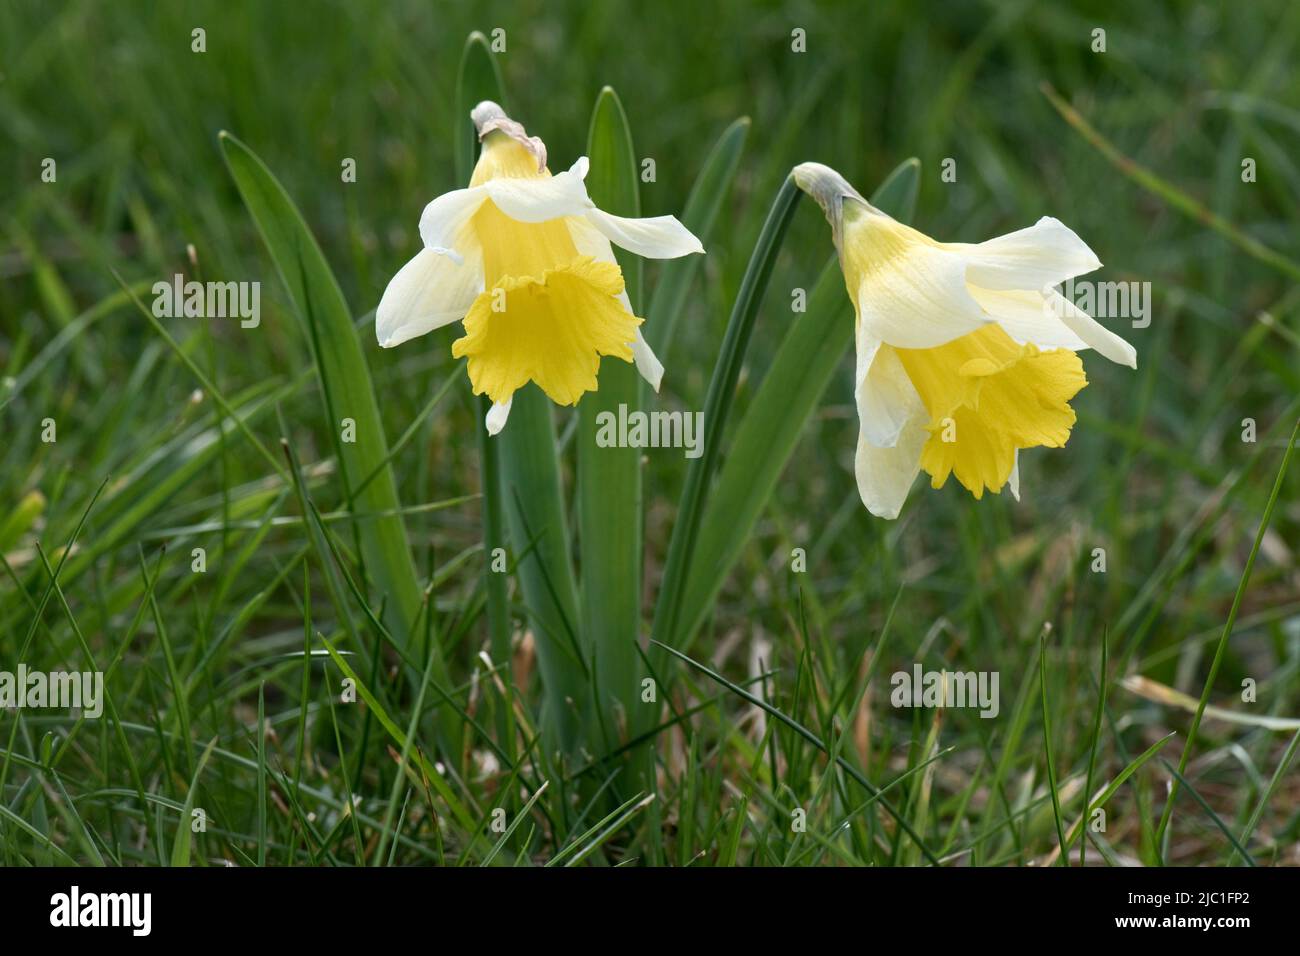 Wild daffodil or Lent lily (Narcissus pseudonarcissus) with pale yellow tepals and darker trumpet flowering in rough grassland in spring, Berkshire, A Stock Photo